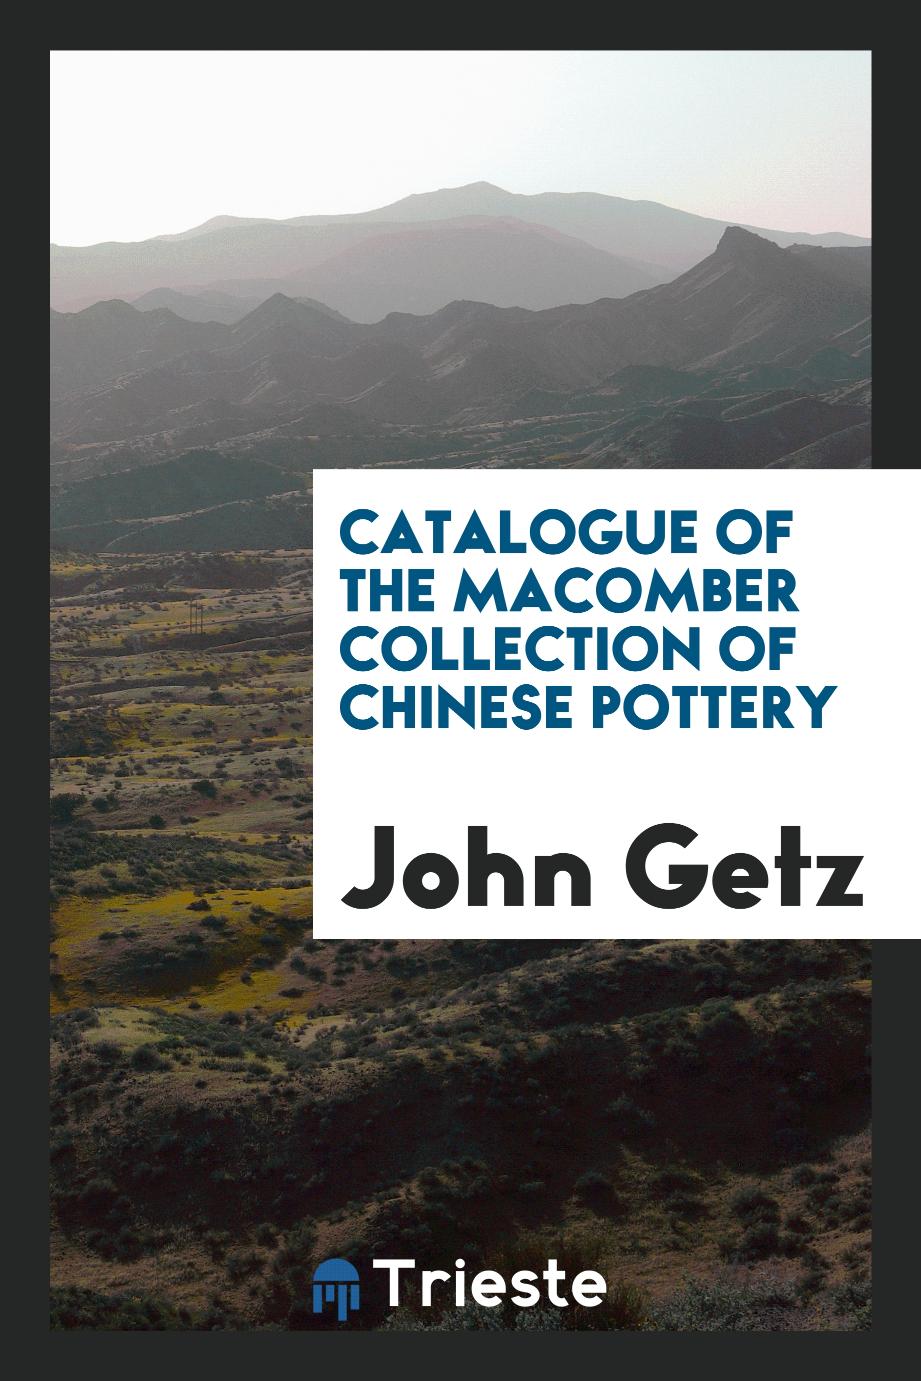 Catalogue of the Macomber Collection of Chinese Pottery